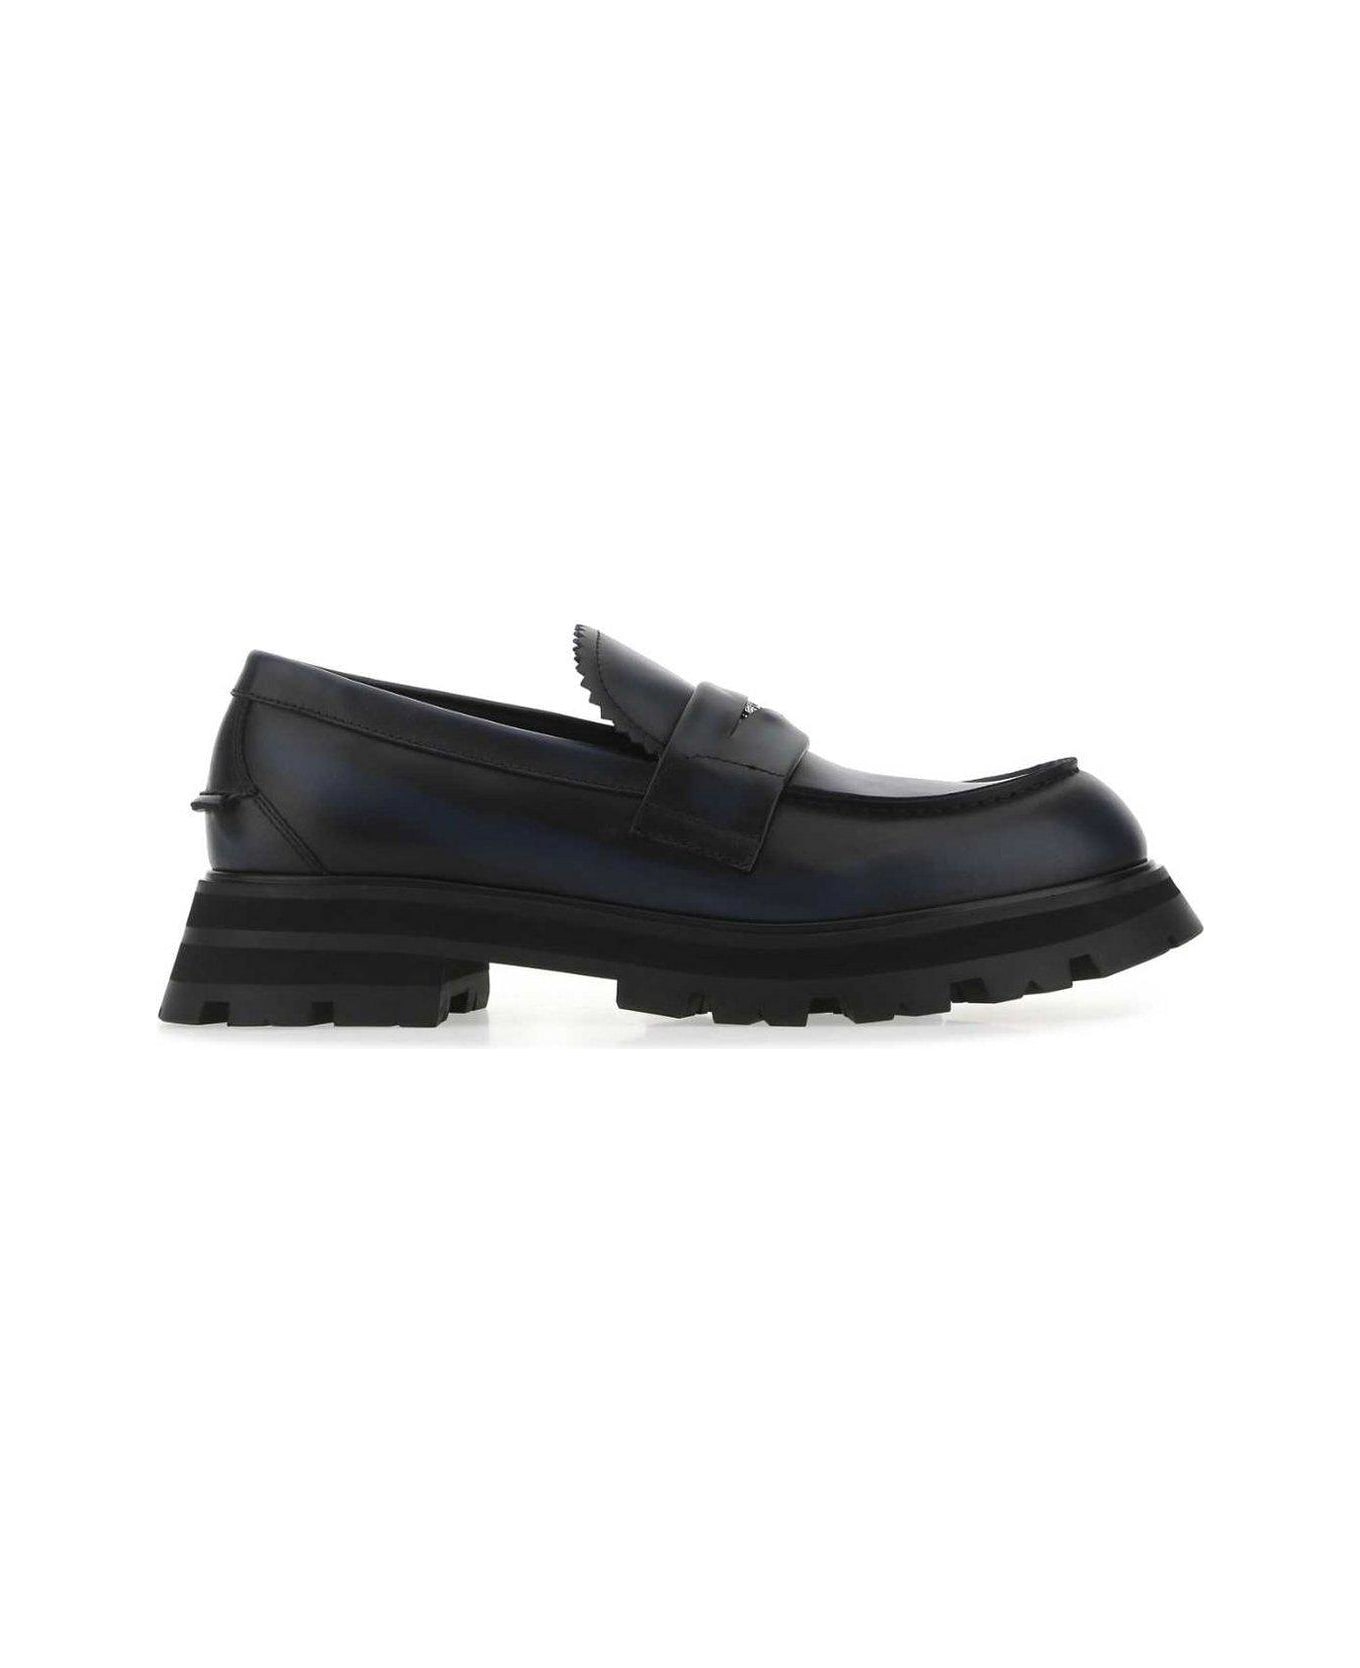 Alexander McQueen Two-toned Loafers - Anthracite/silver